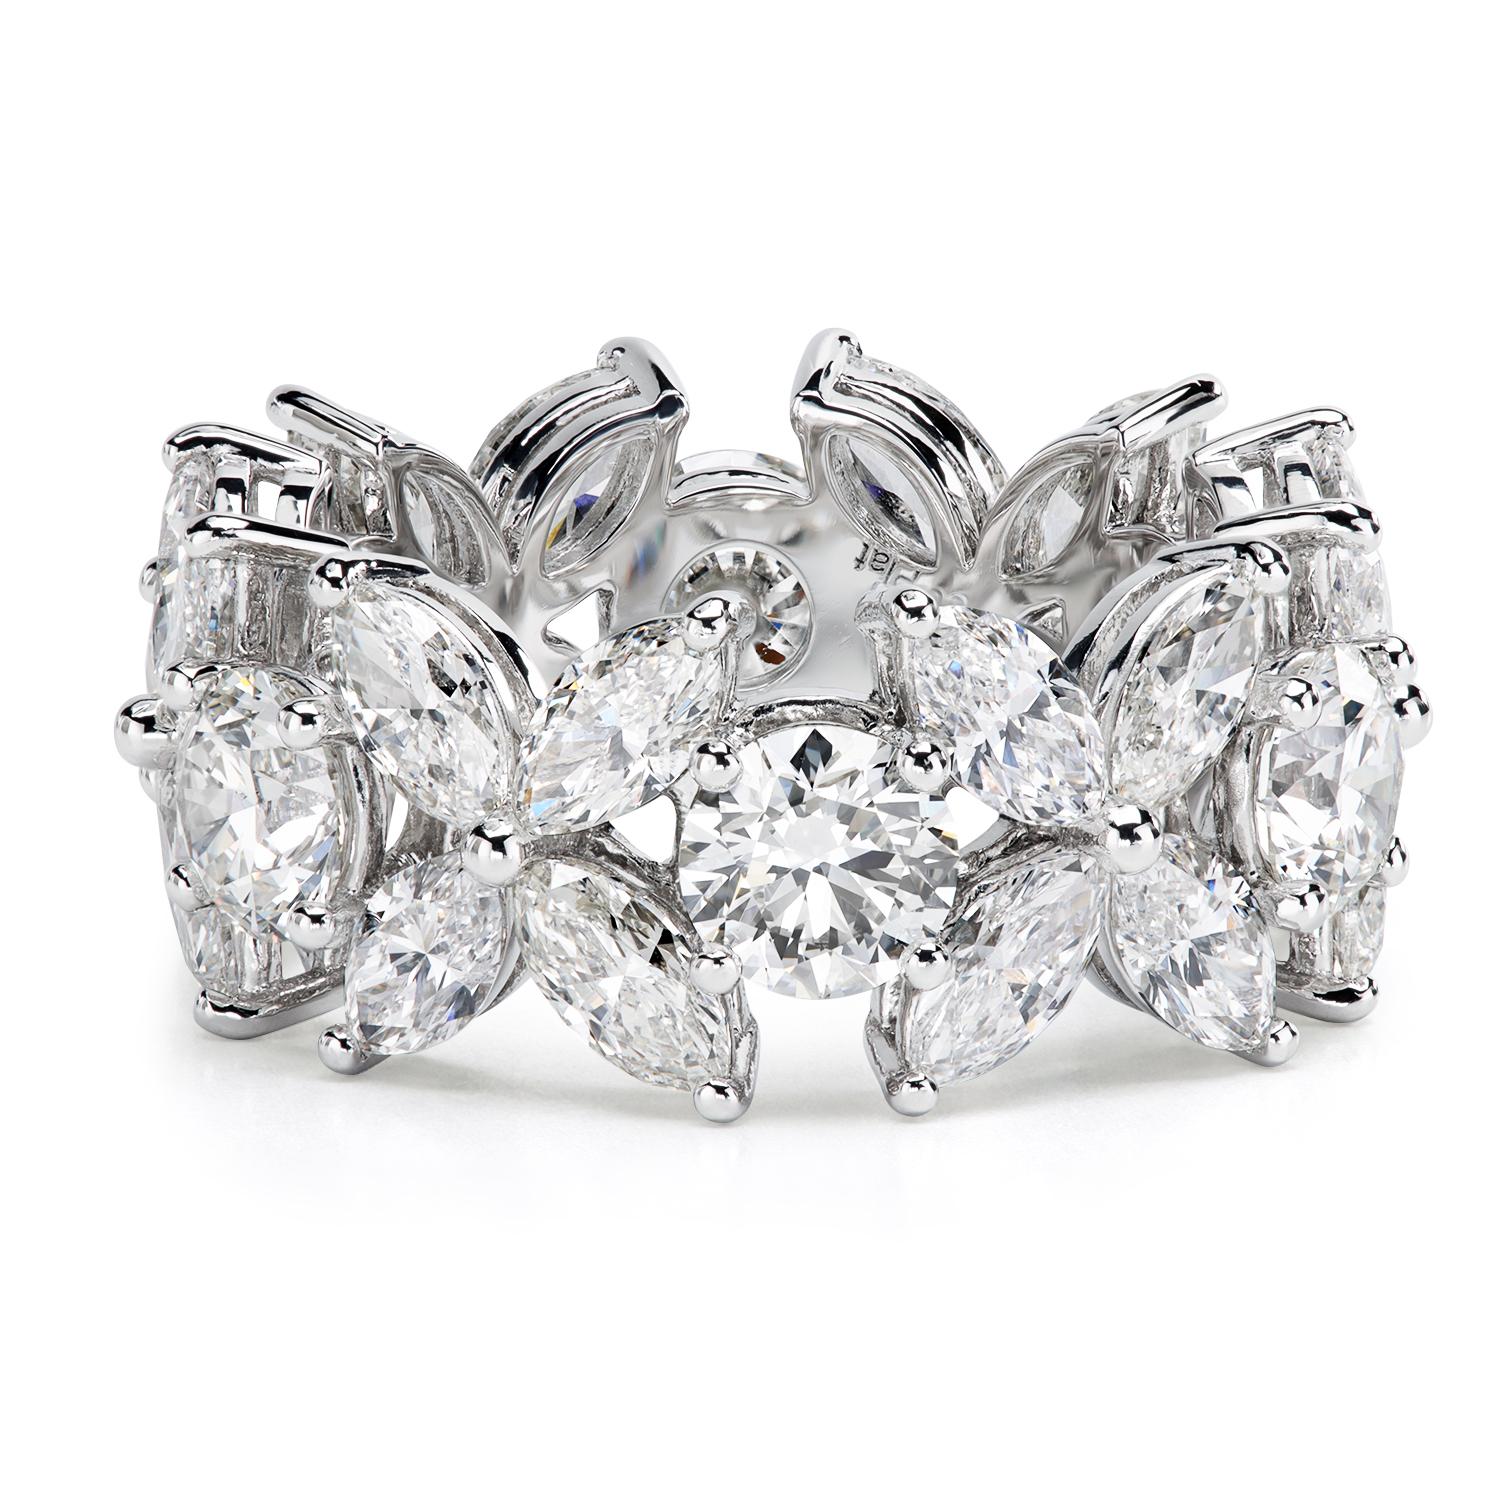 Gorgeous eternity band of alternating round diamonds and Florette marquise clusters by the famed New York jeweler and Avant Garde artist Leon Mege. 
All diamonds are G/VS; the total weight is approximately 6.00 ctw. Round diamonds are approximately